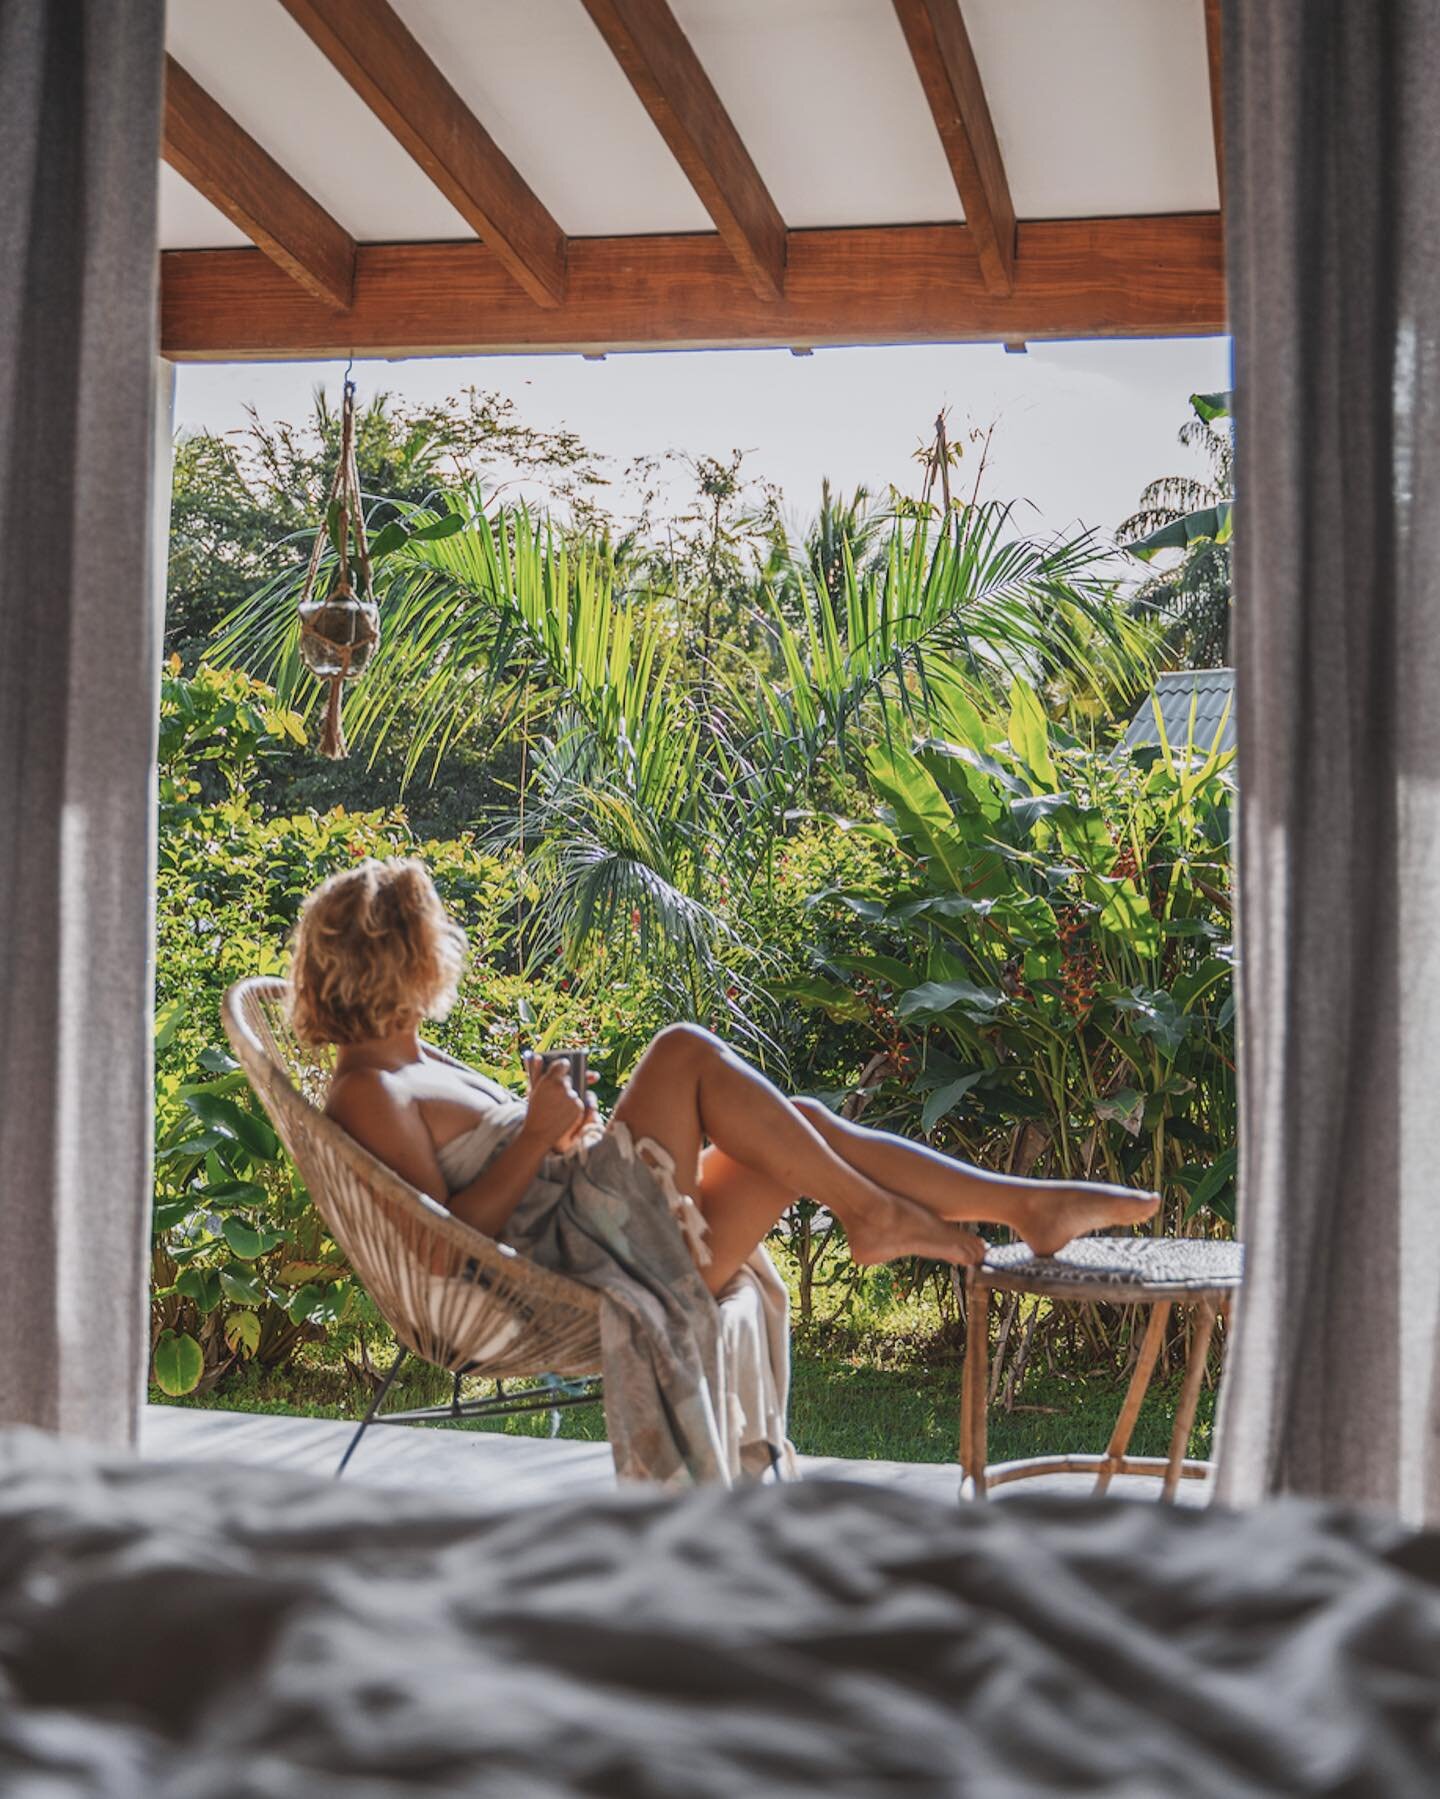 ONLY A FEW SPOTS LEFT!✨ March 4-10 on our Panama Luxury Yoga &amp; Adventure Retreat! 

One week, all-inclusive - enjoy delicious food, an infinity salt water pool with a dreamy ocean view, and beautiful ocean casitas with open-concept bathroom!✨

Ex